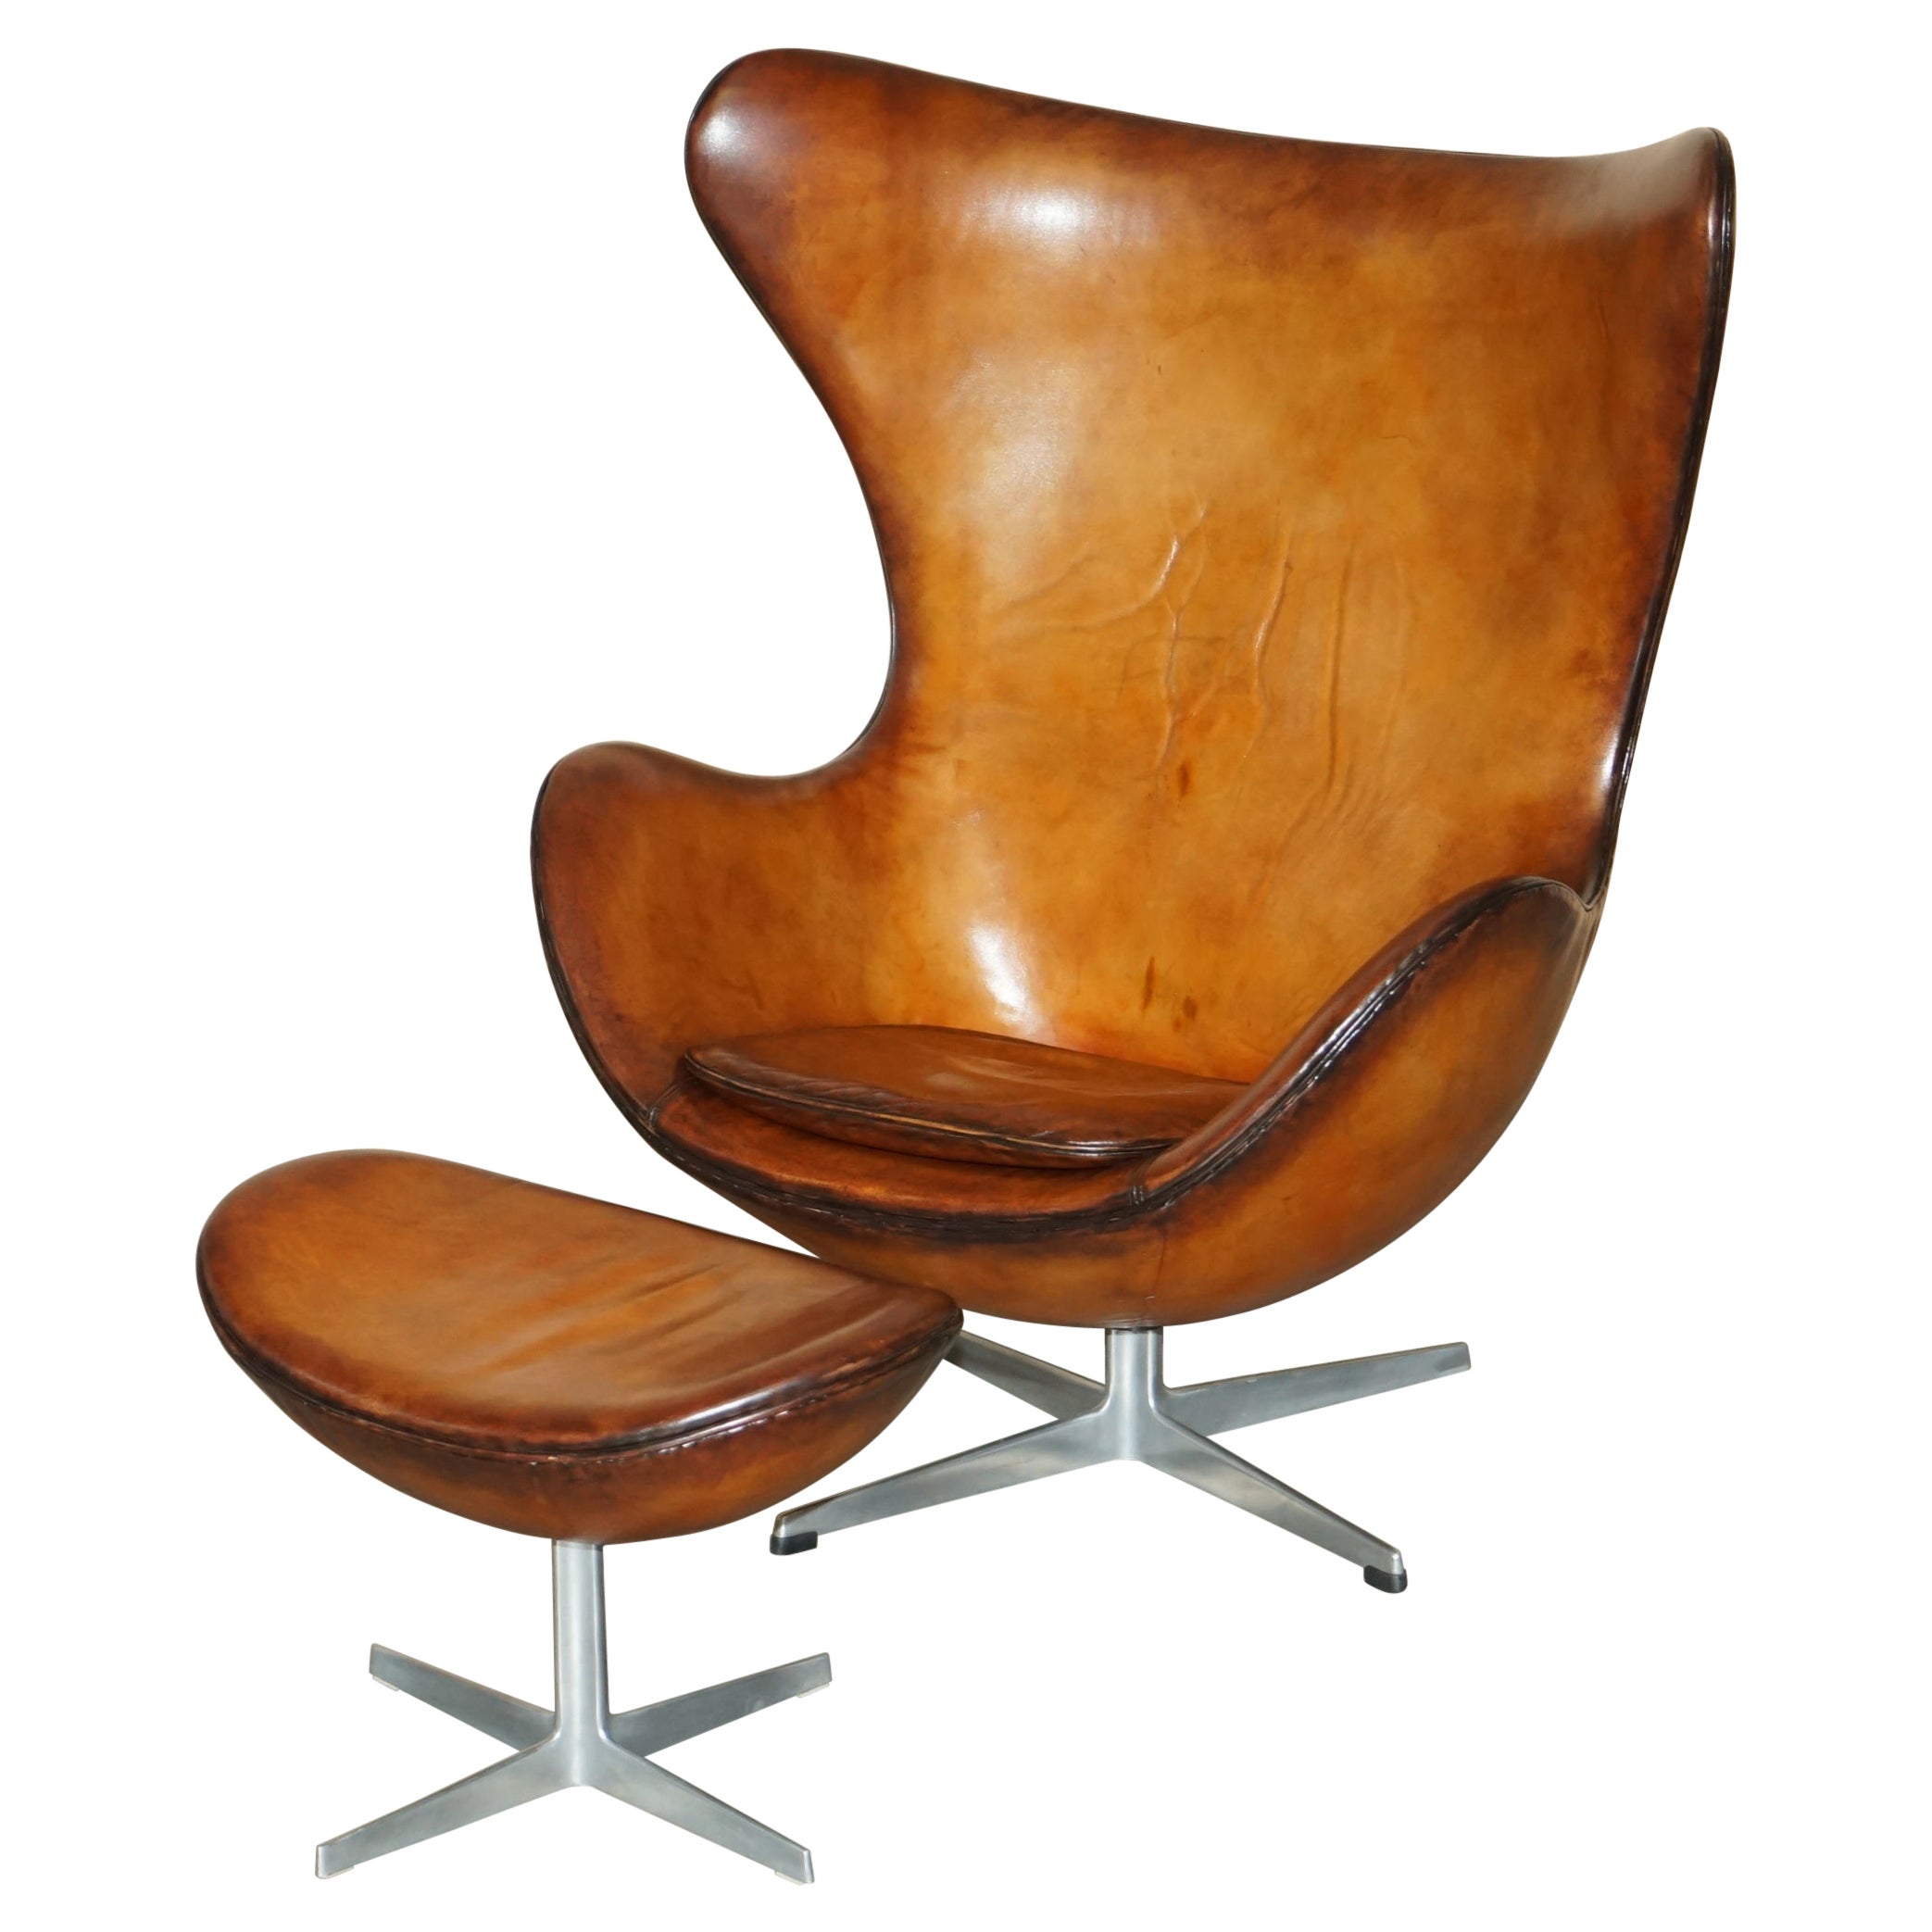 ORIGINAL FULLY RESTORED 1968 FRITZ HANSEN EGG CHAiR & FOOTSTOOL IN BROWN LEATHER For Sale